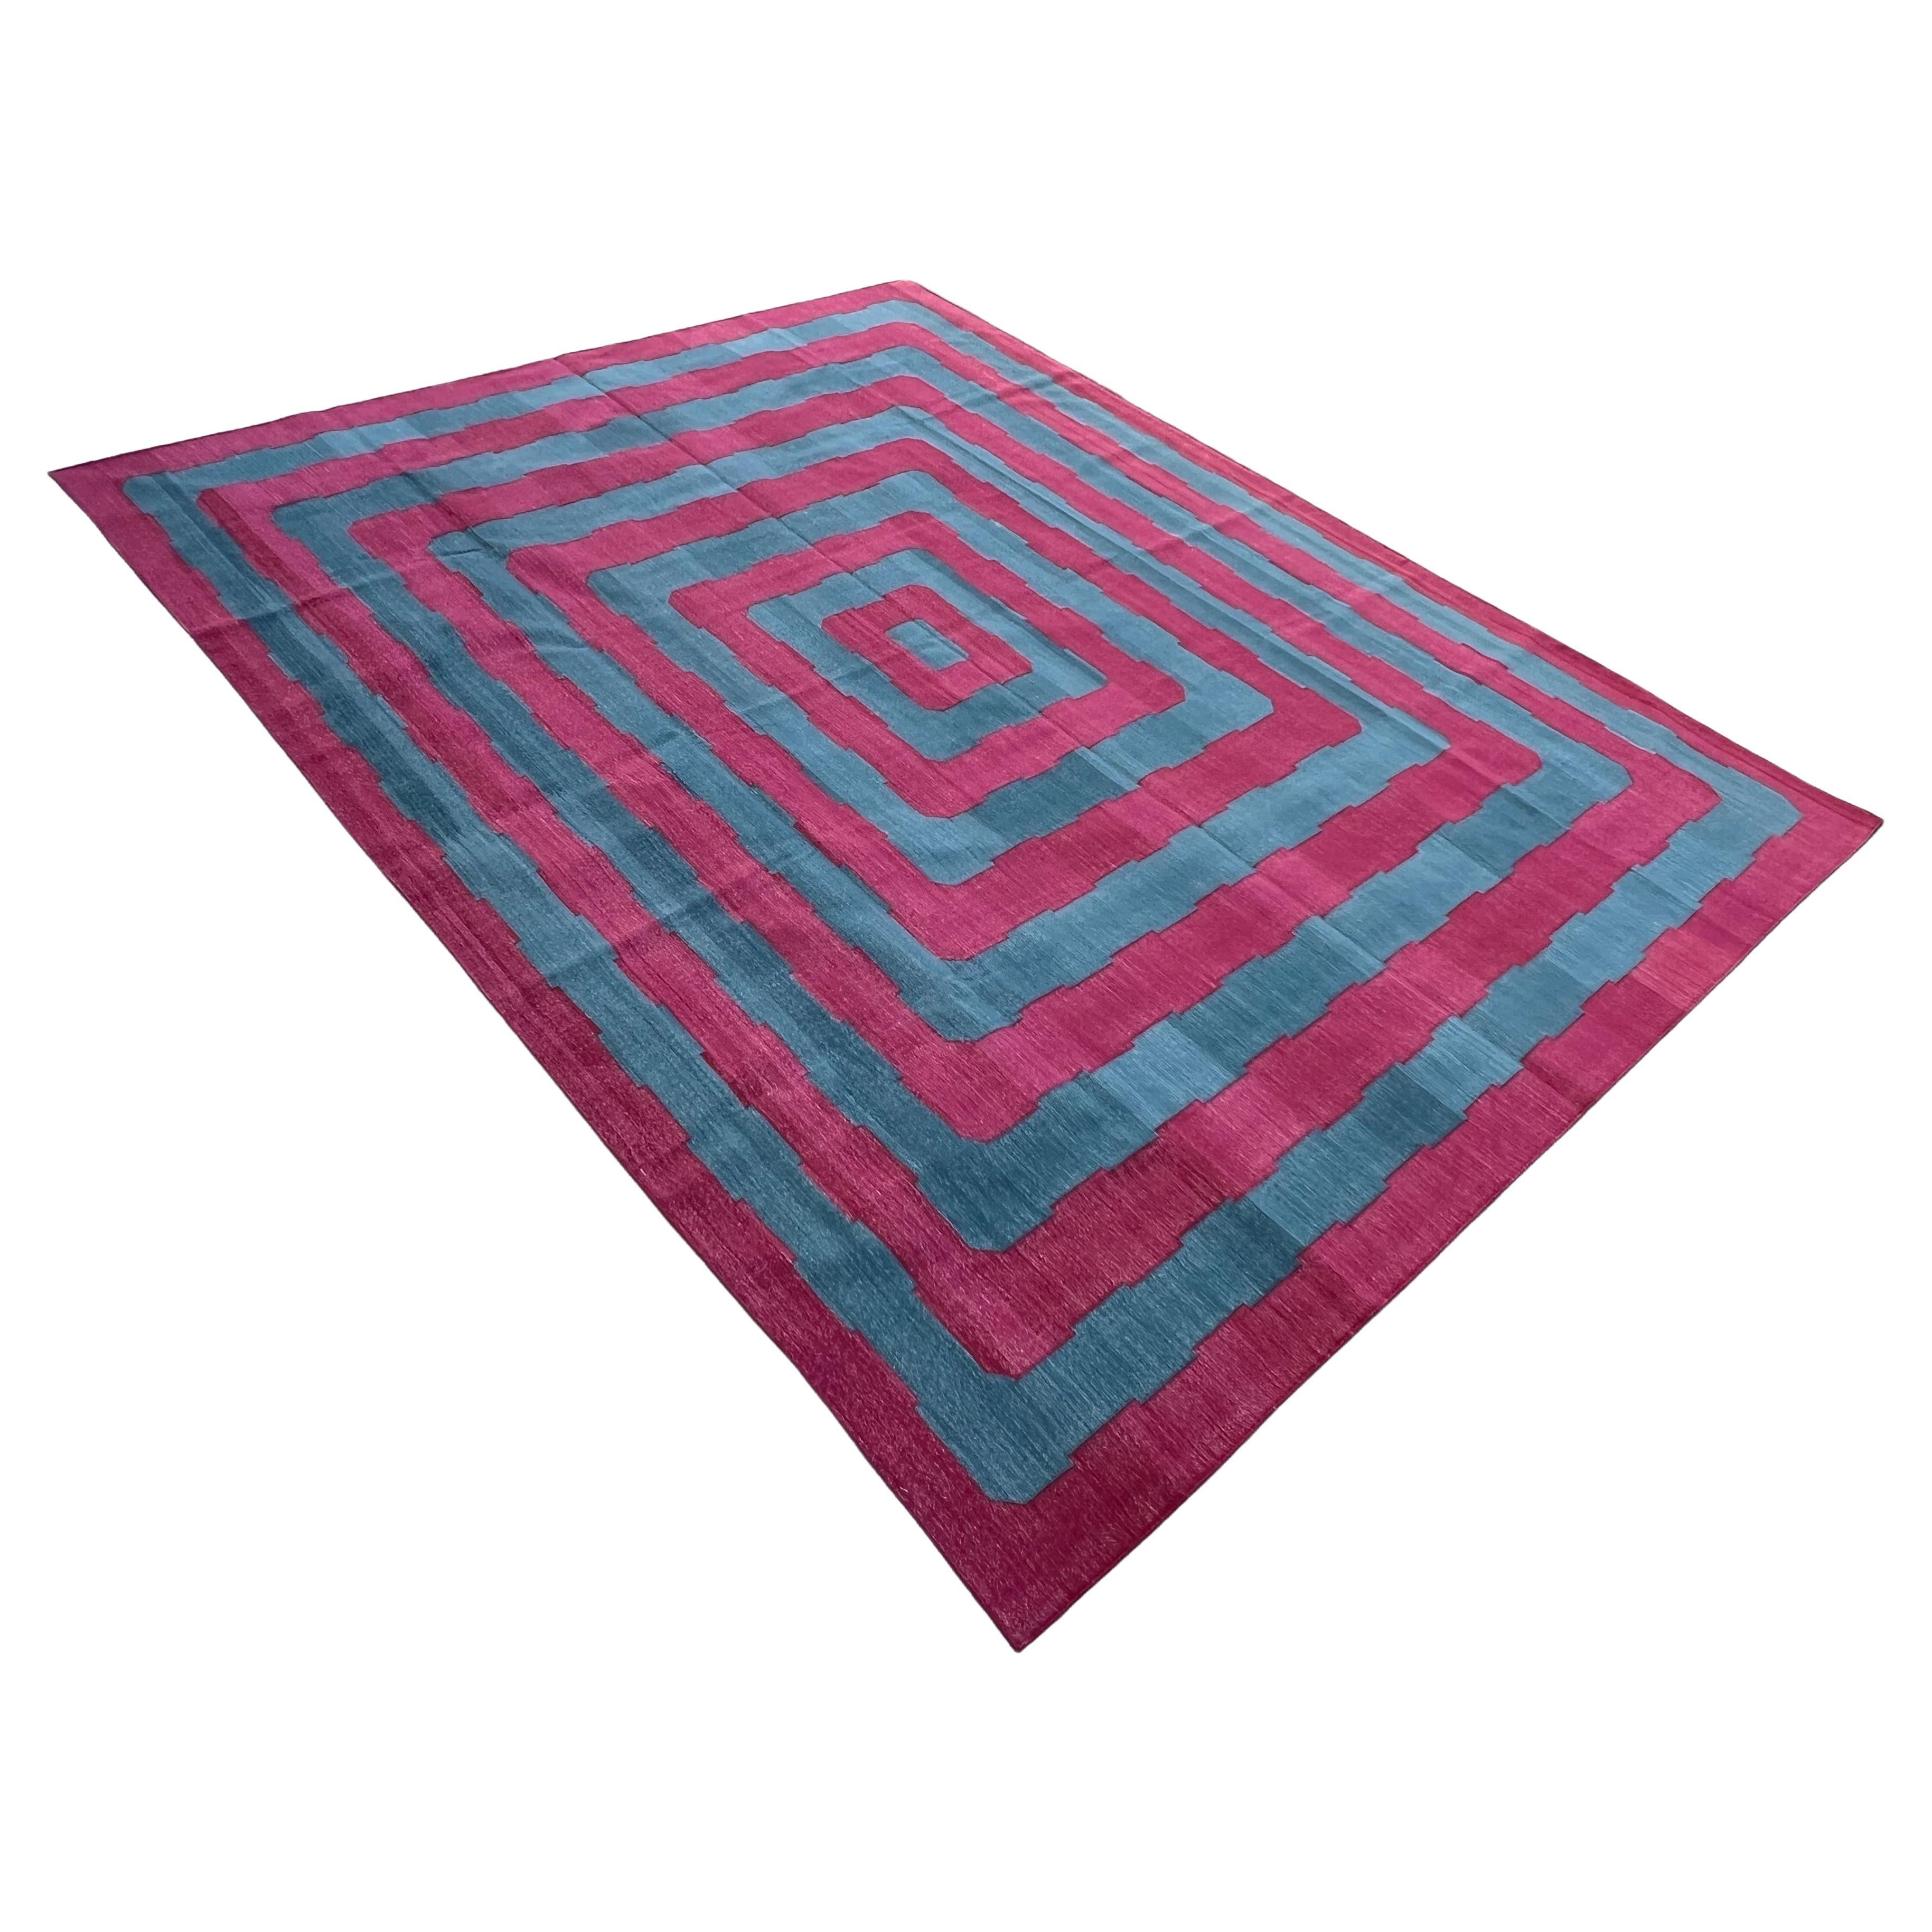 Handmade Cotton Area Flat Weave Rug, 10x14 Blue And Pink Striped Indian Dhurrie For Sale